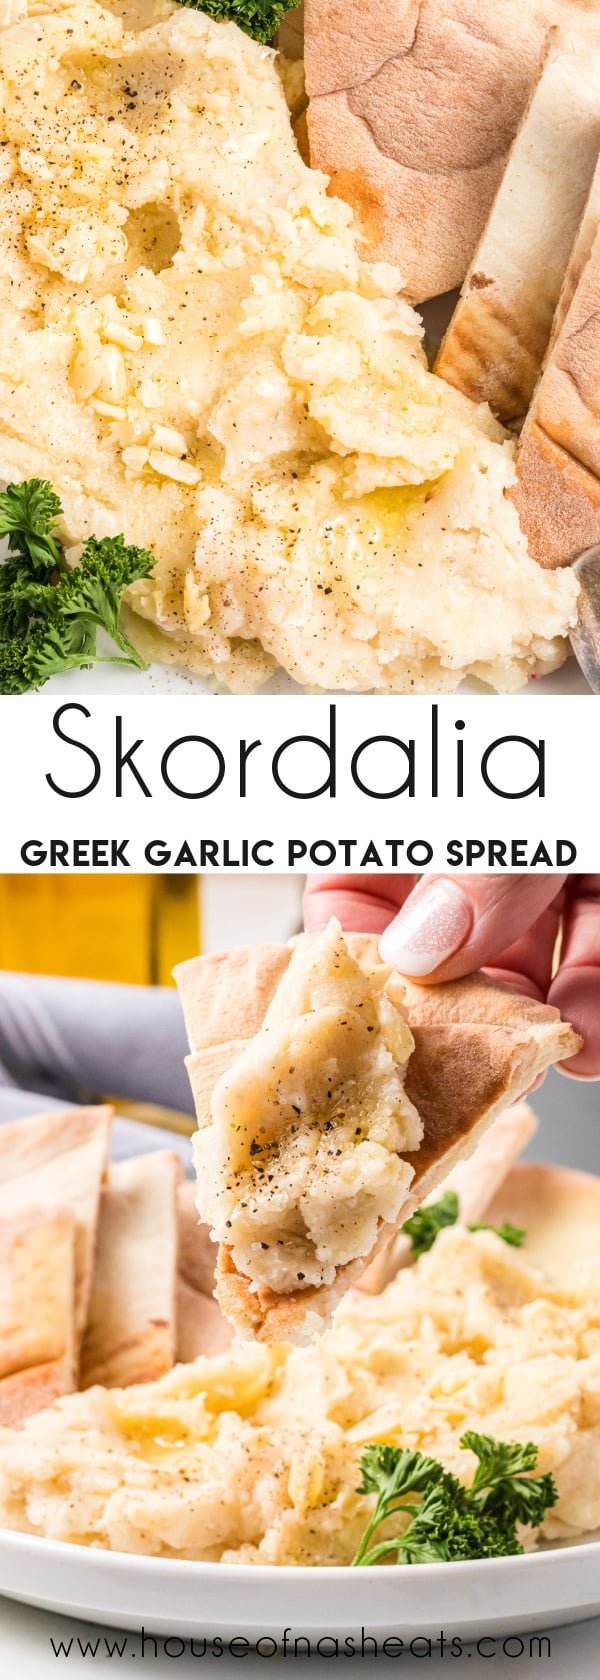 A collage of images of skordalia Greek garlic potato spread with text overlay.